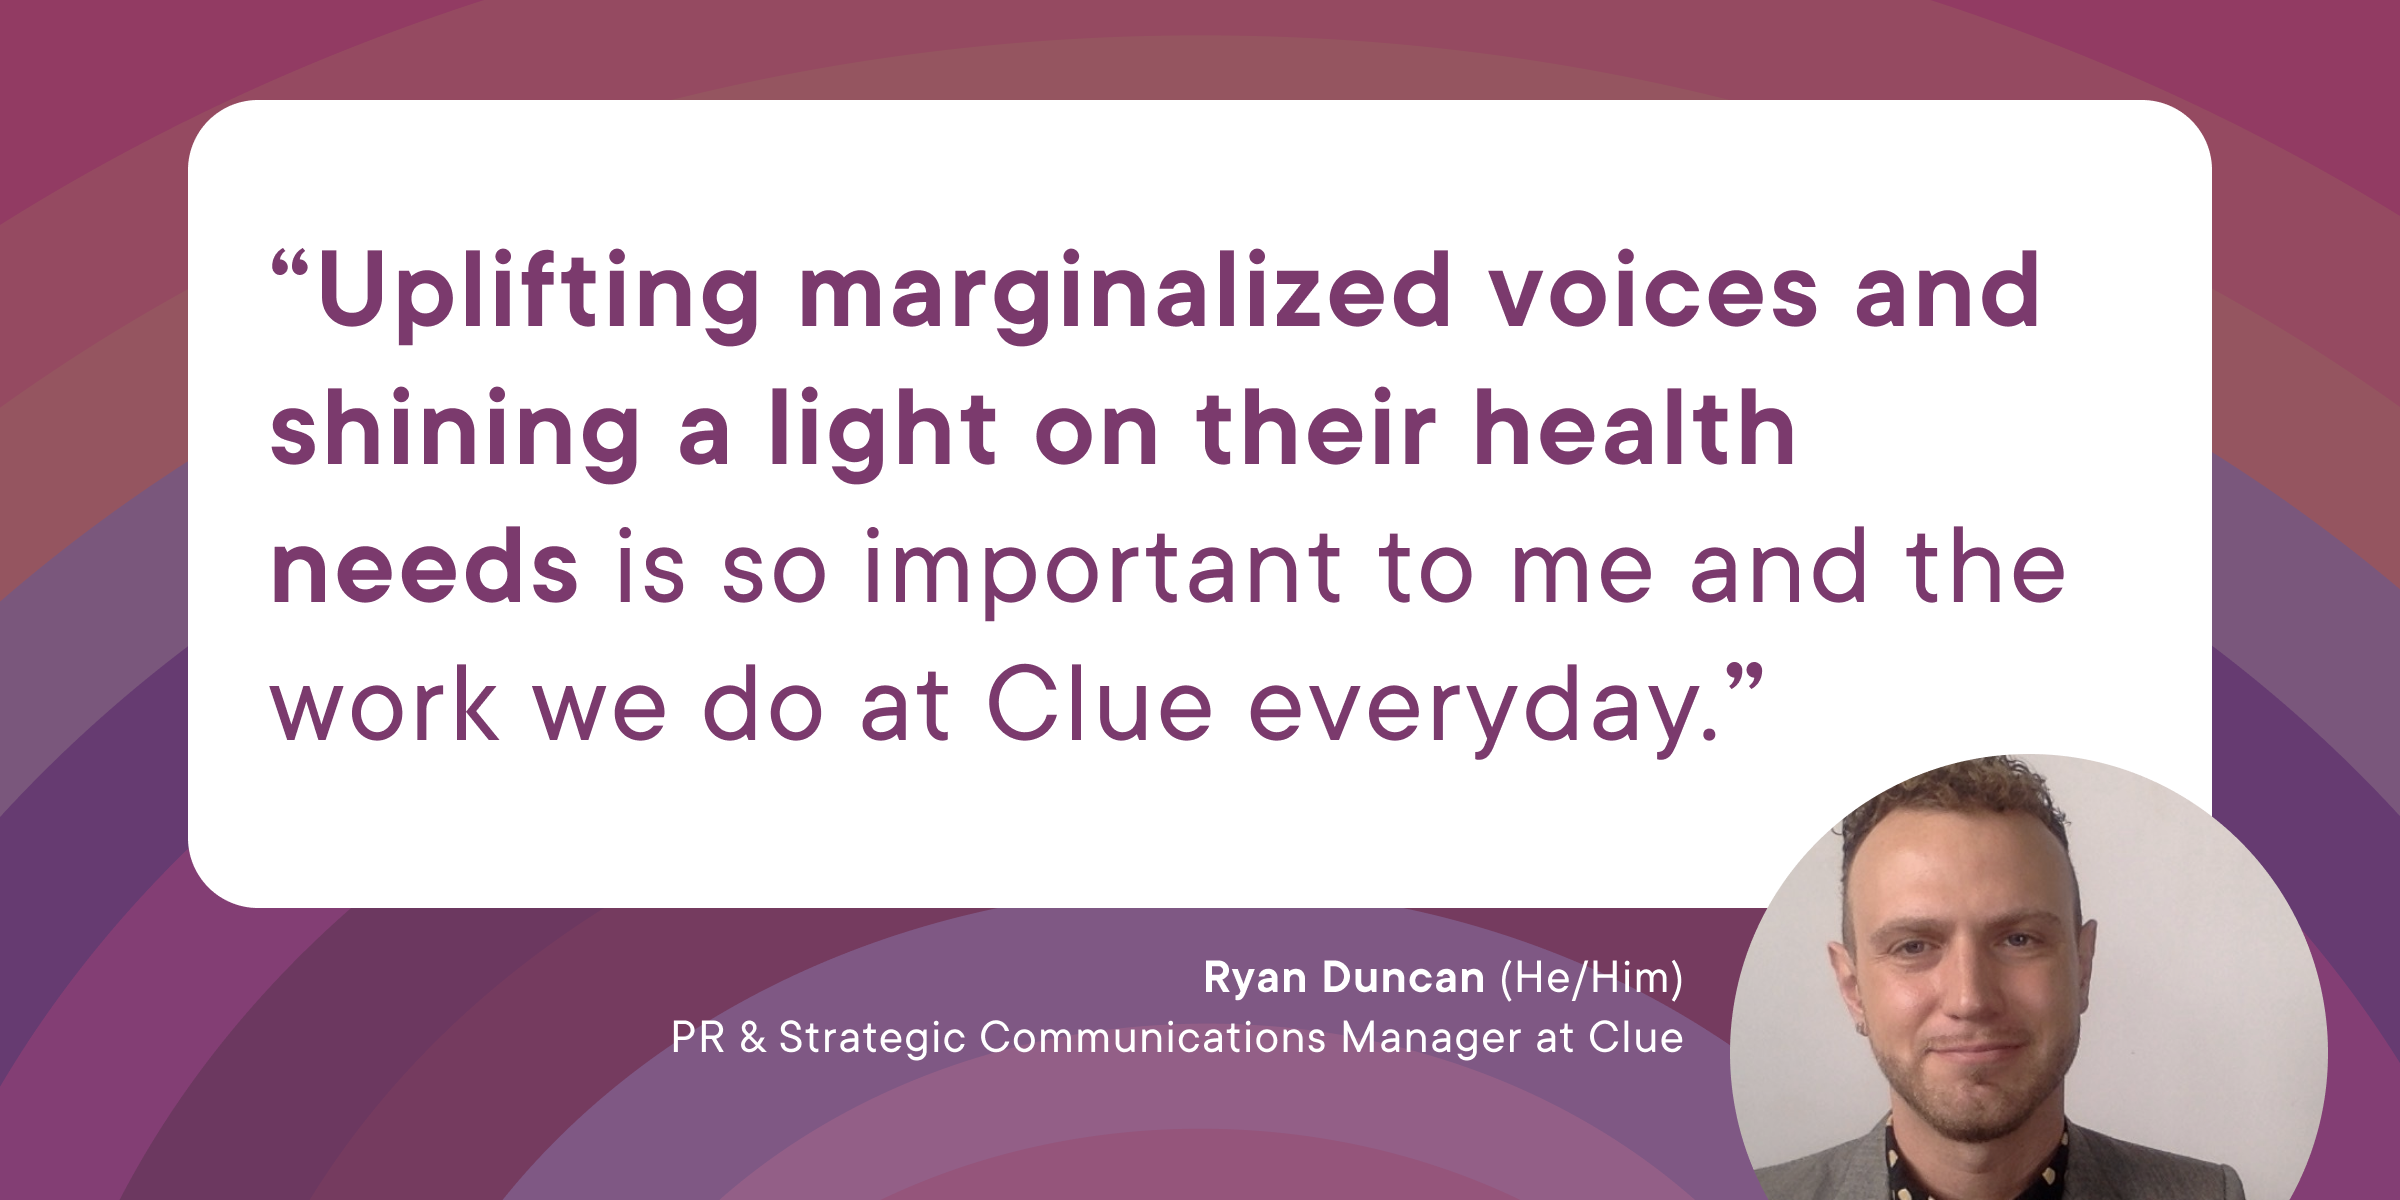 Quote from Clue employee Ryan on a purple background saying, "Uplifting marginalized voices and shining a light on their health needs is so important to me and the work we do at Clue everyday."